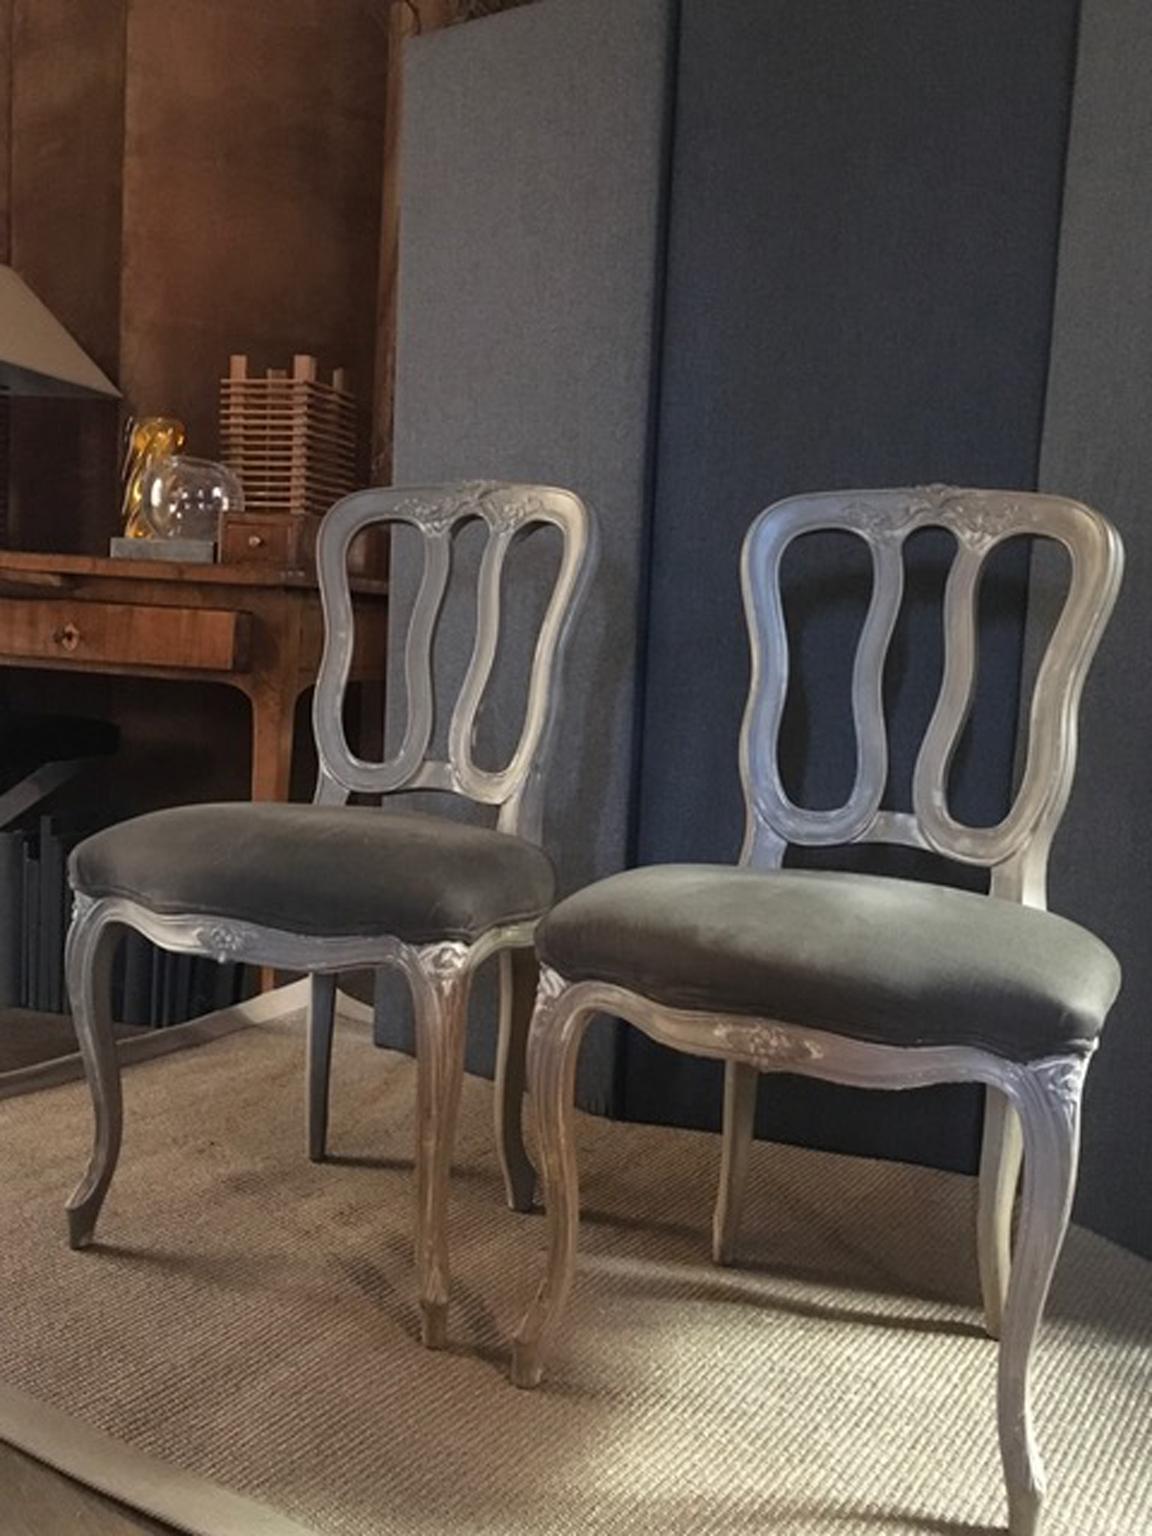 This elegant pair of wooden chair was made in France, following the charming French Provincial style. They are lacquered with a modern color, that is a warm desert light brown tone that gives the look of an antique finish to the wood. Their style